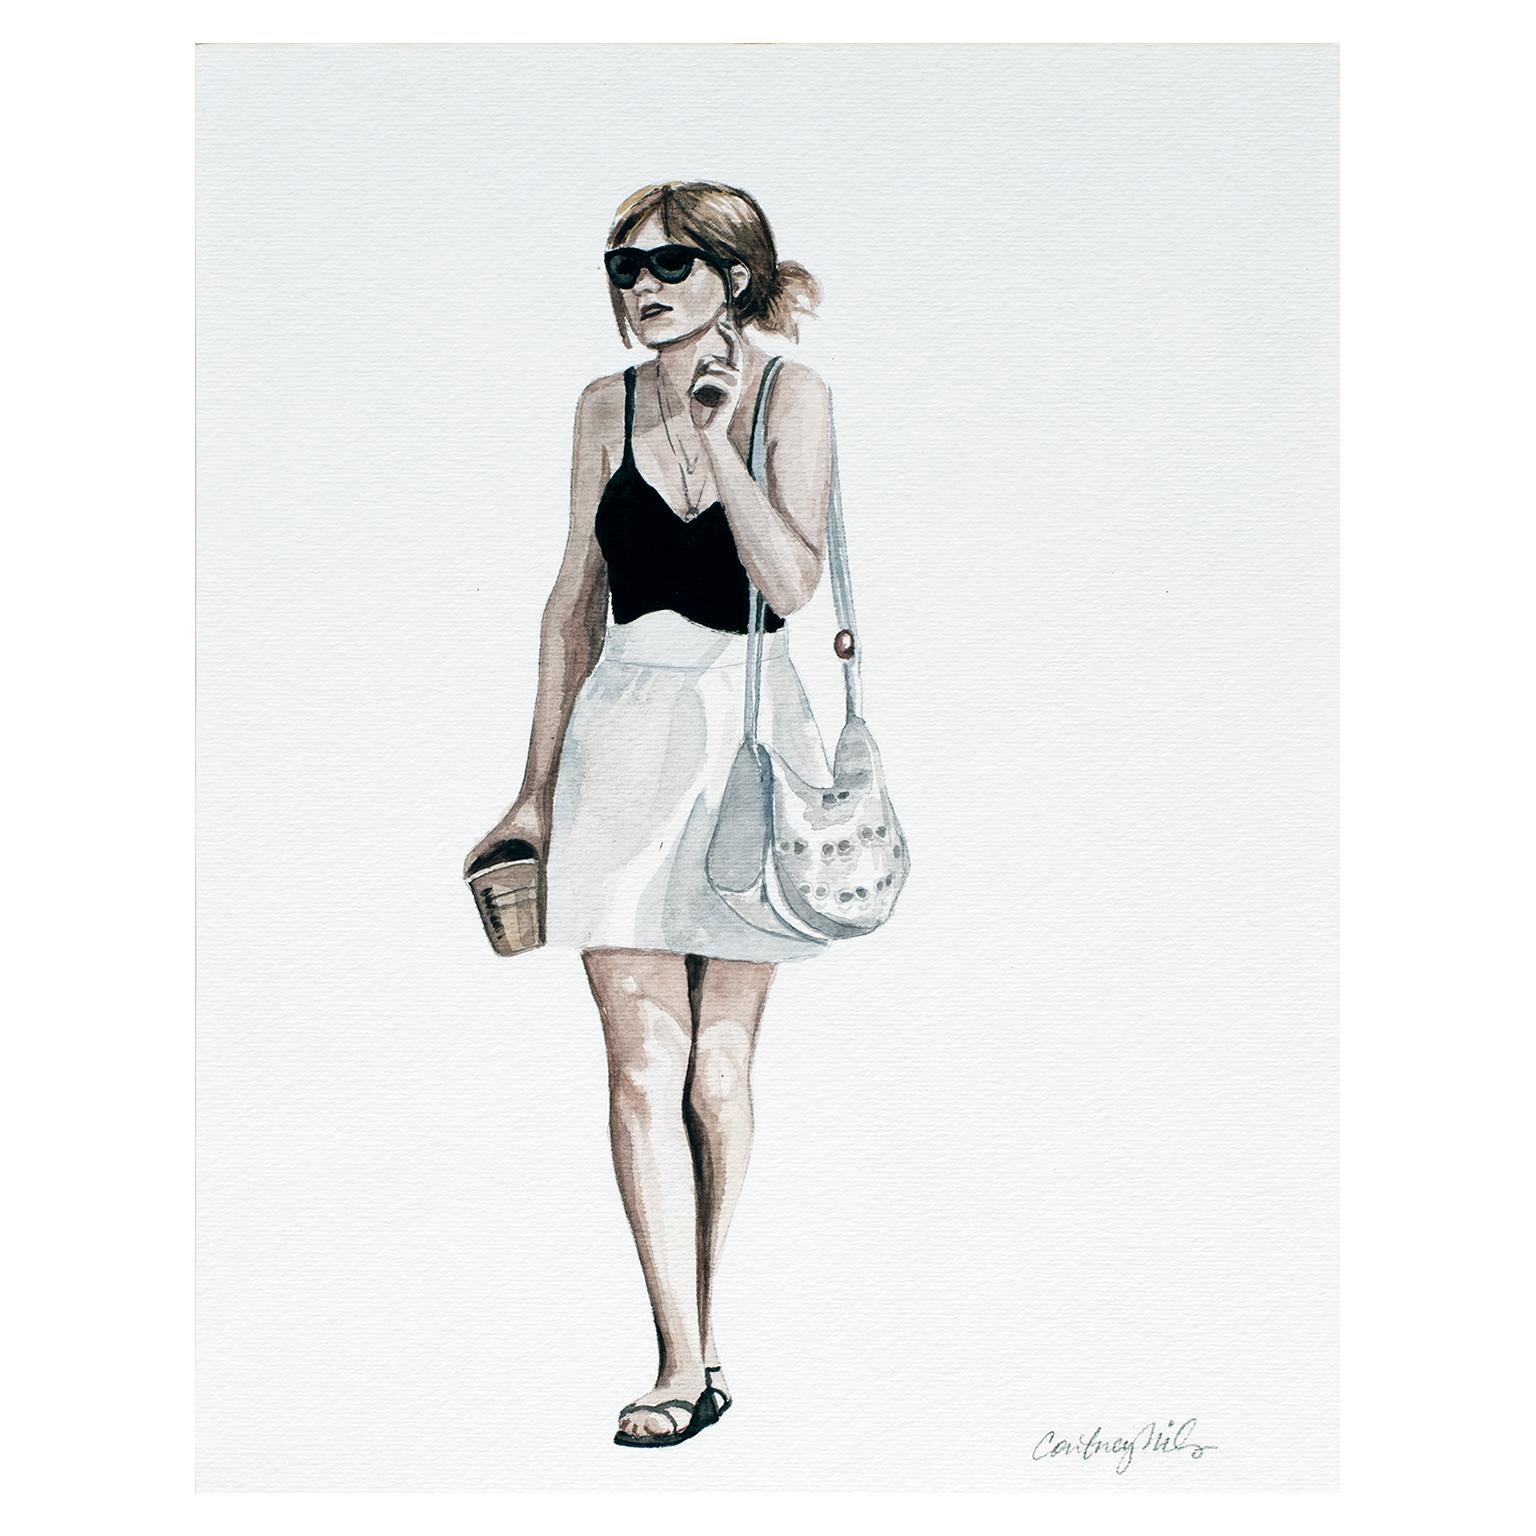 Courtney Incognito 018 by Courtney Miles, 2008. 
Original gouache and graphite on paper. 
11 x 8 inches Unframed
Fashion Illustration/painting. Blonde wearing black tank and white skirt with white purse.

Courtney Miles originally did 100 works for